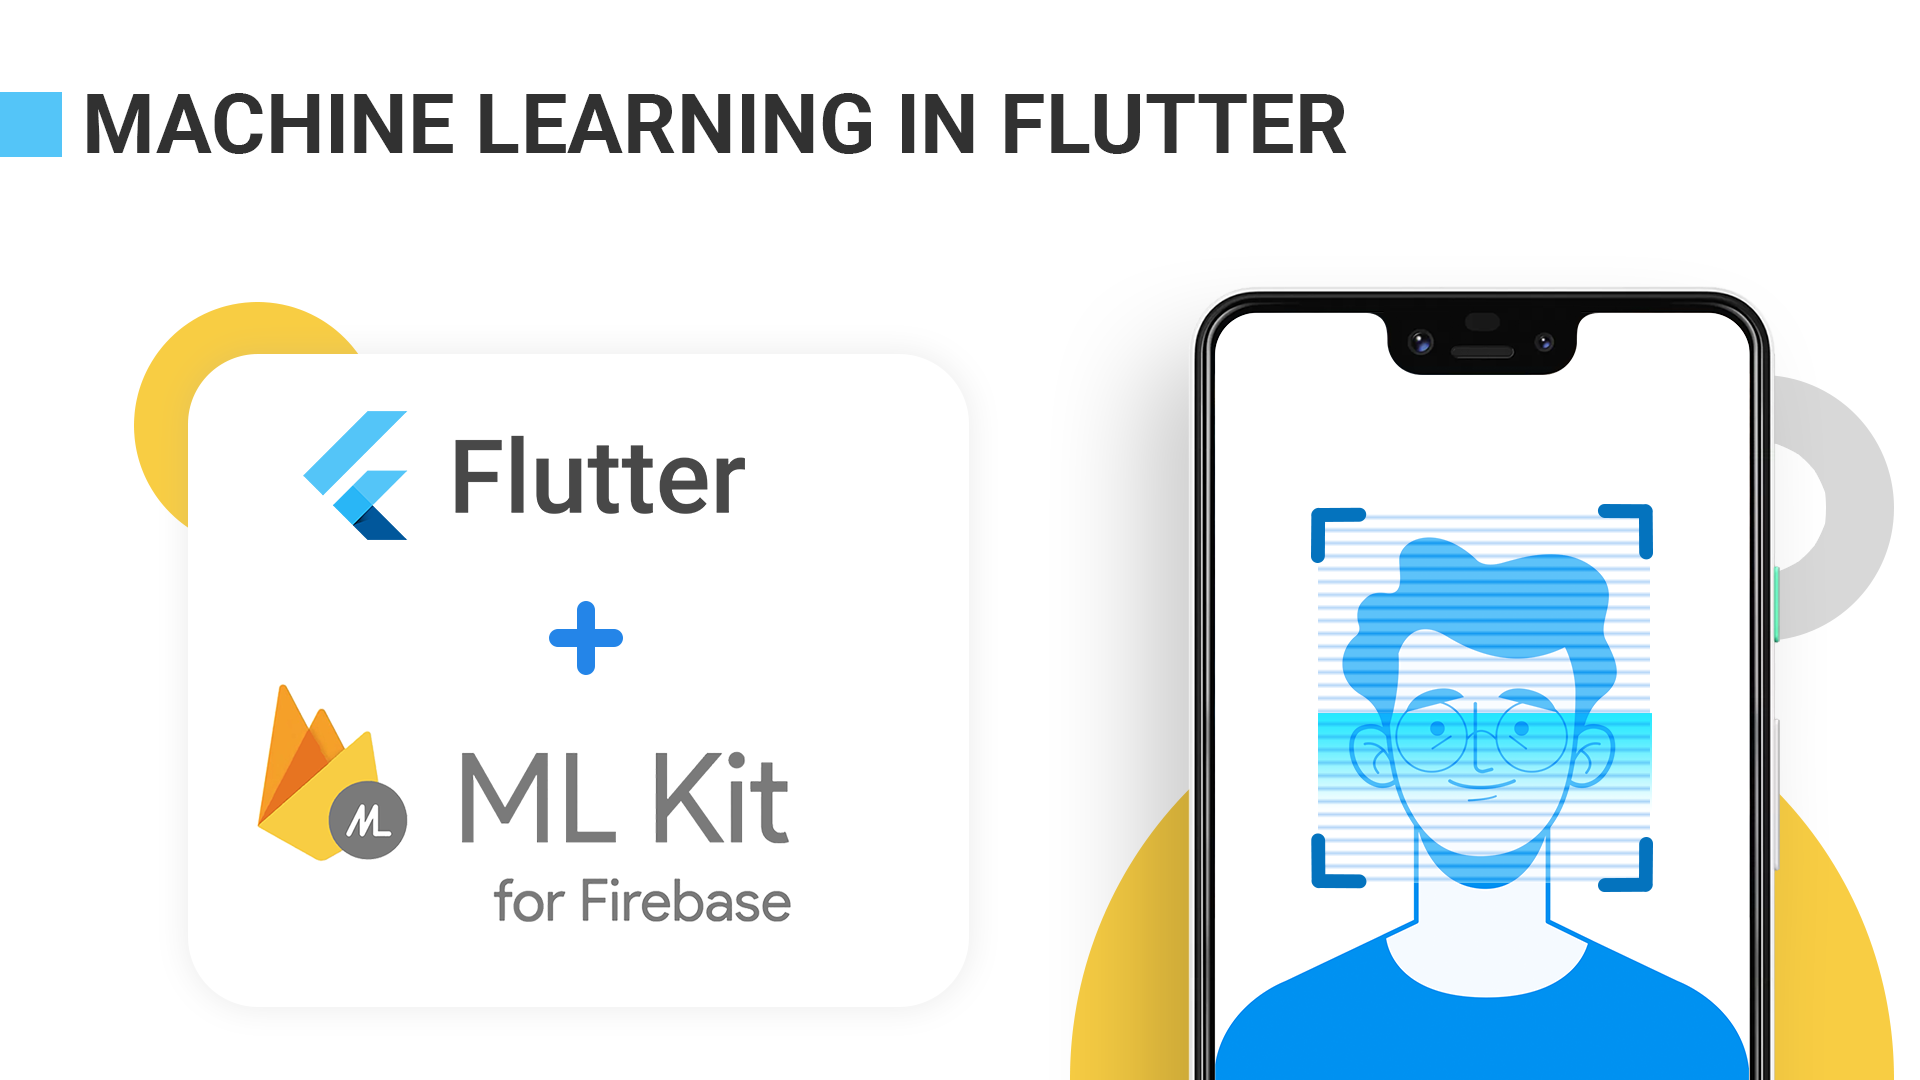 Making a Chess App with Flutter